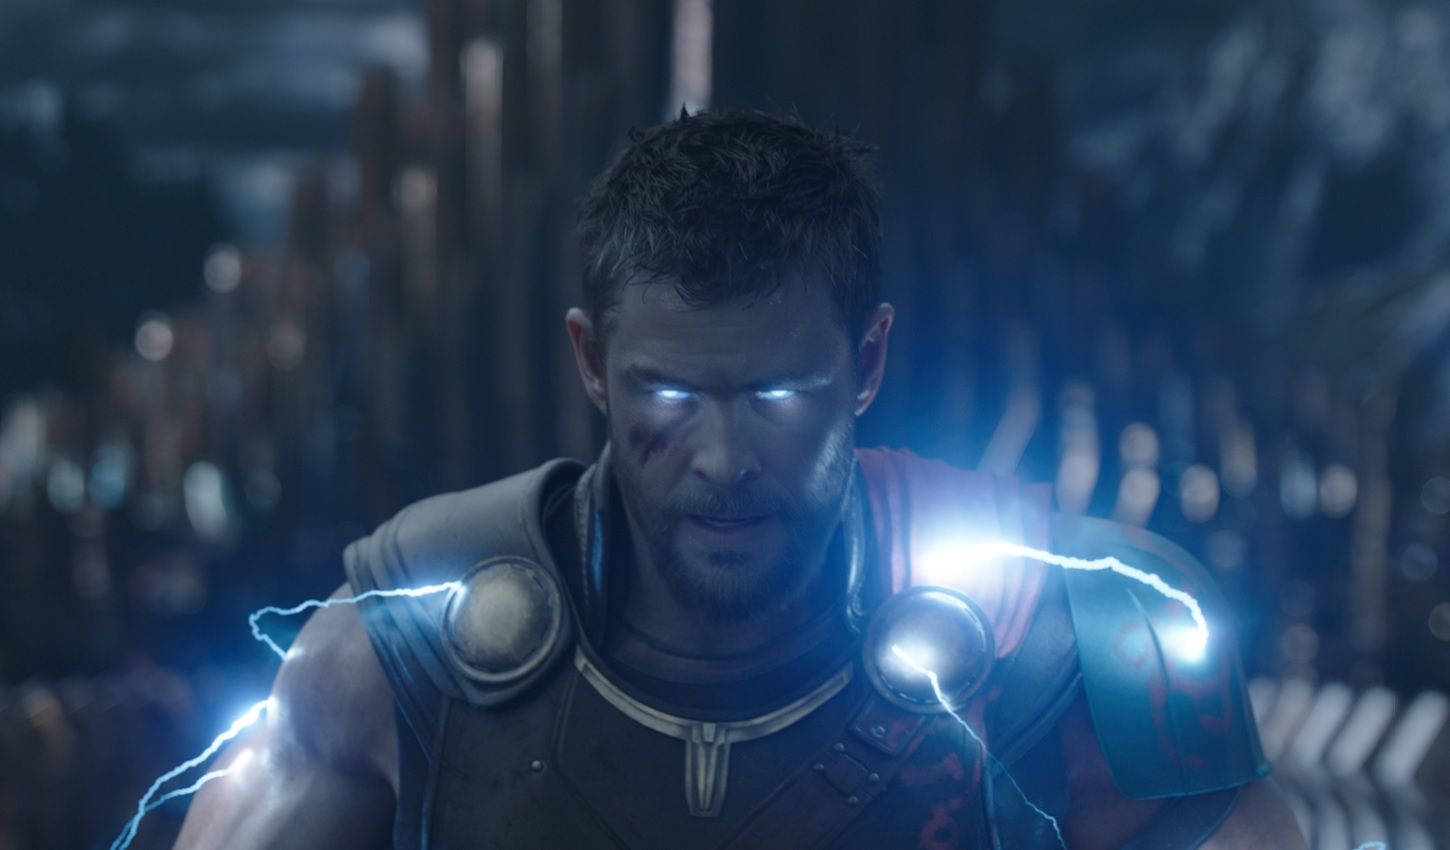 Thor in a still from the movie Thor: Ragnarok - Thor